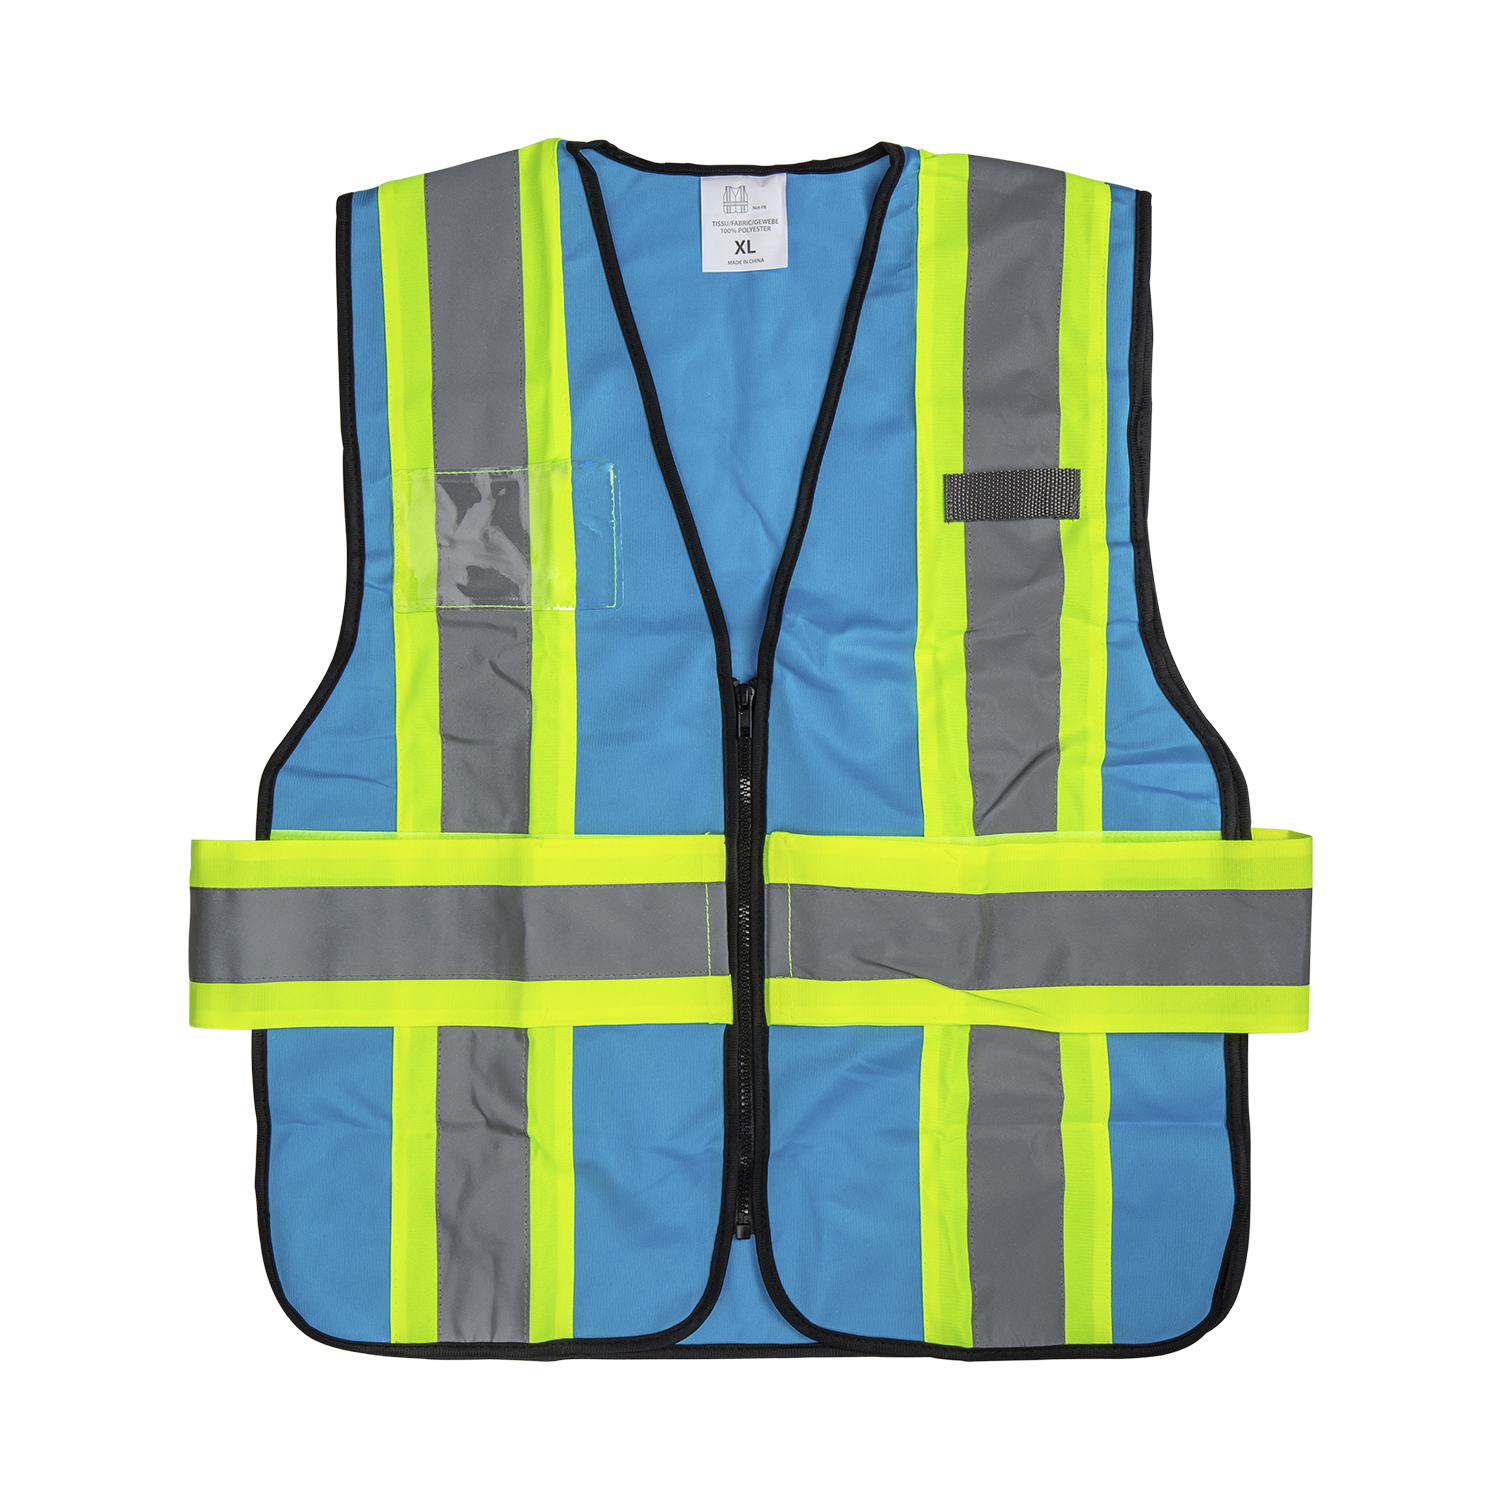 Karat High Visibility Reflective Safety Vest with Zipper Fastening (Blue), X-Large - 1 pc